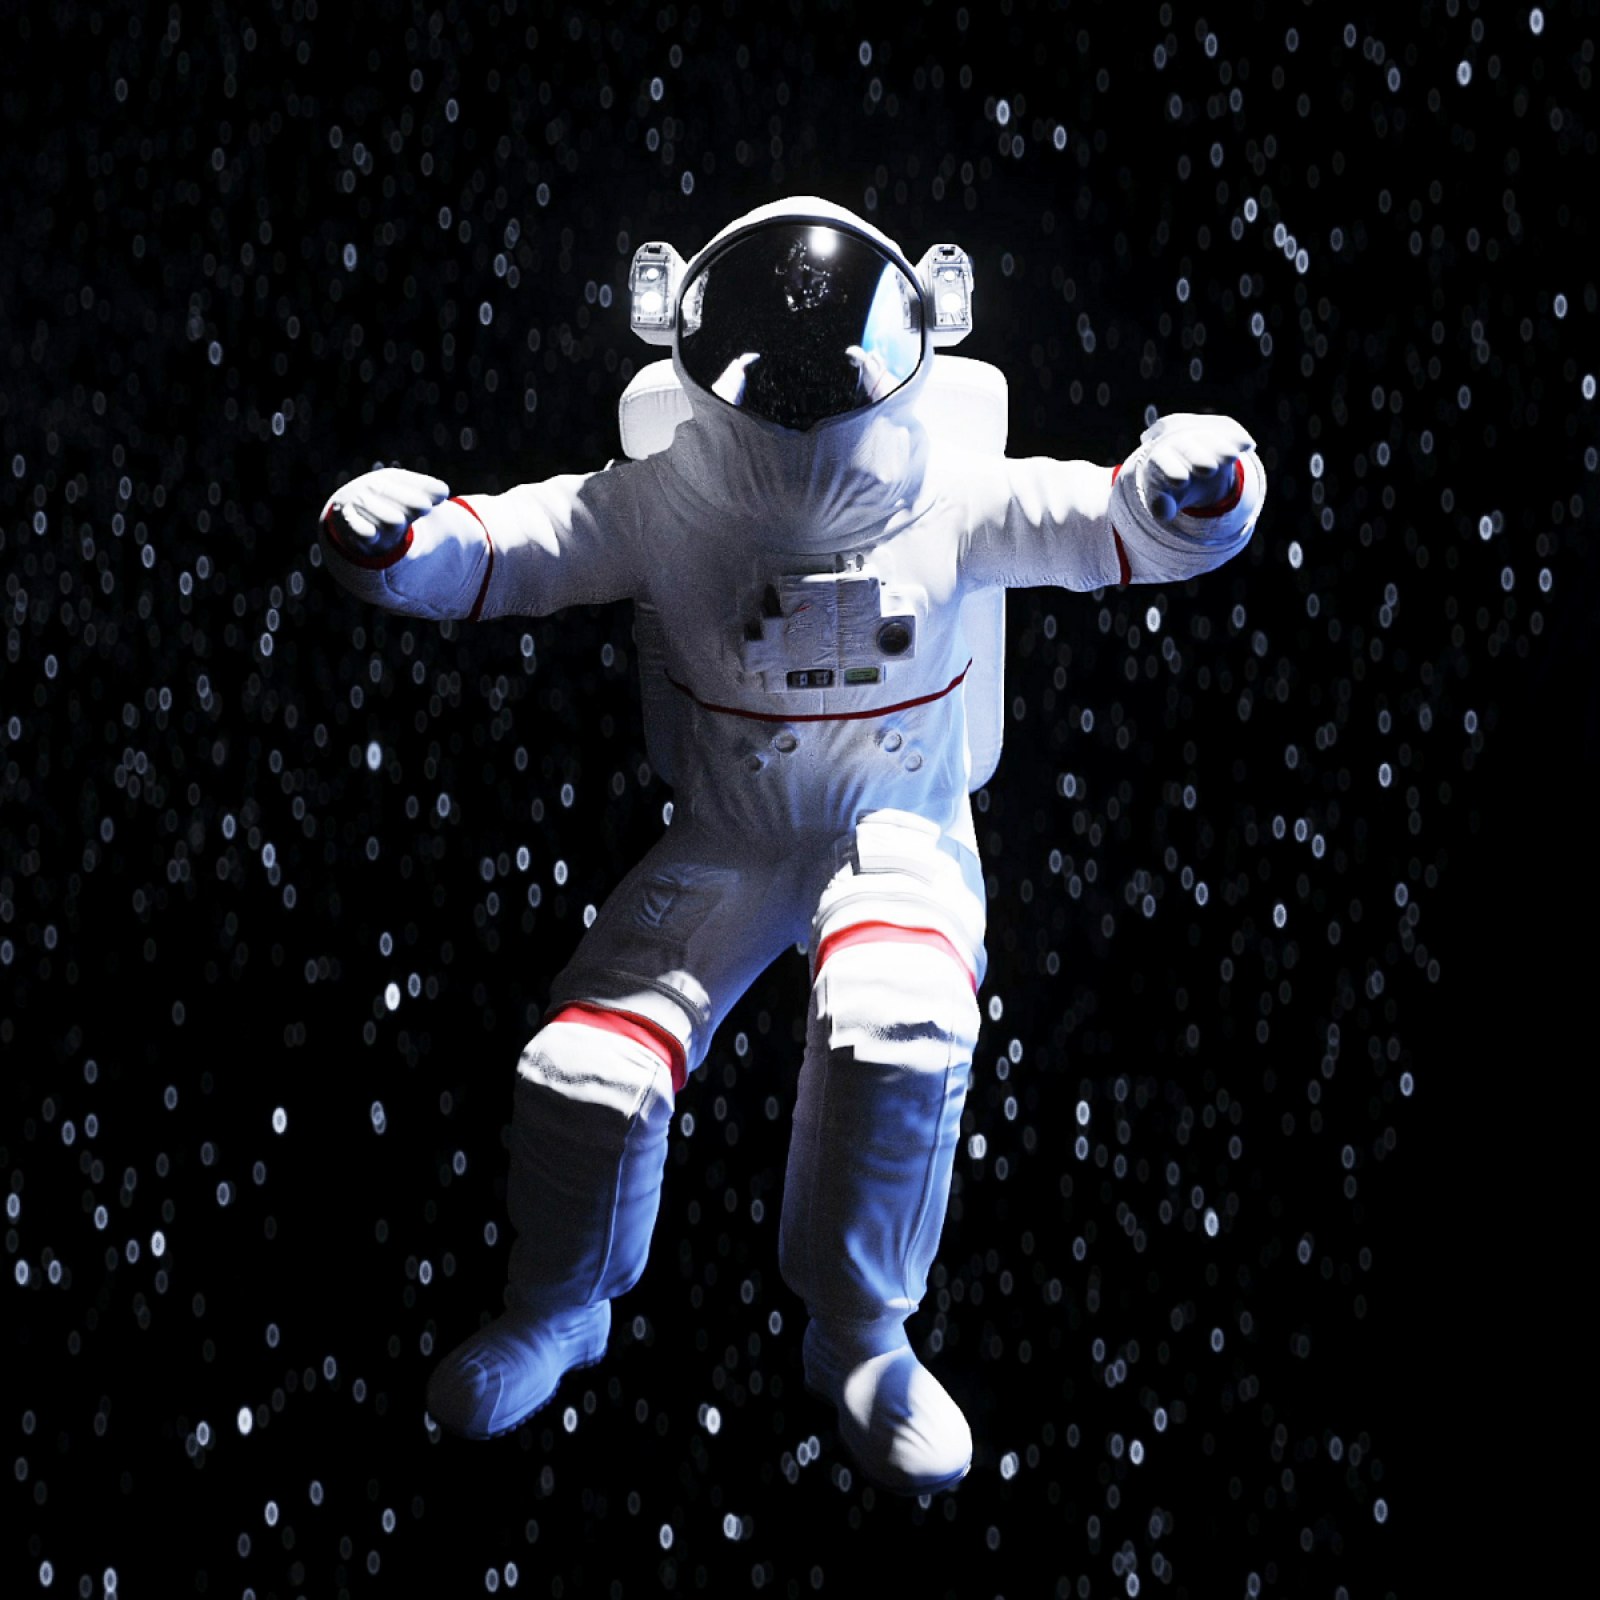 astronaut in space floating